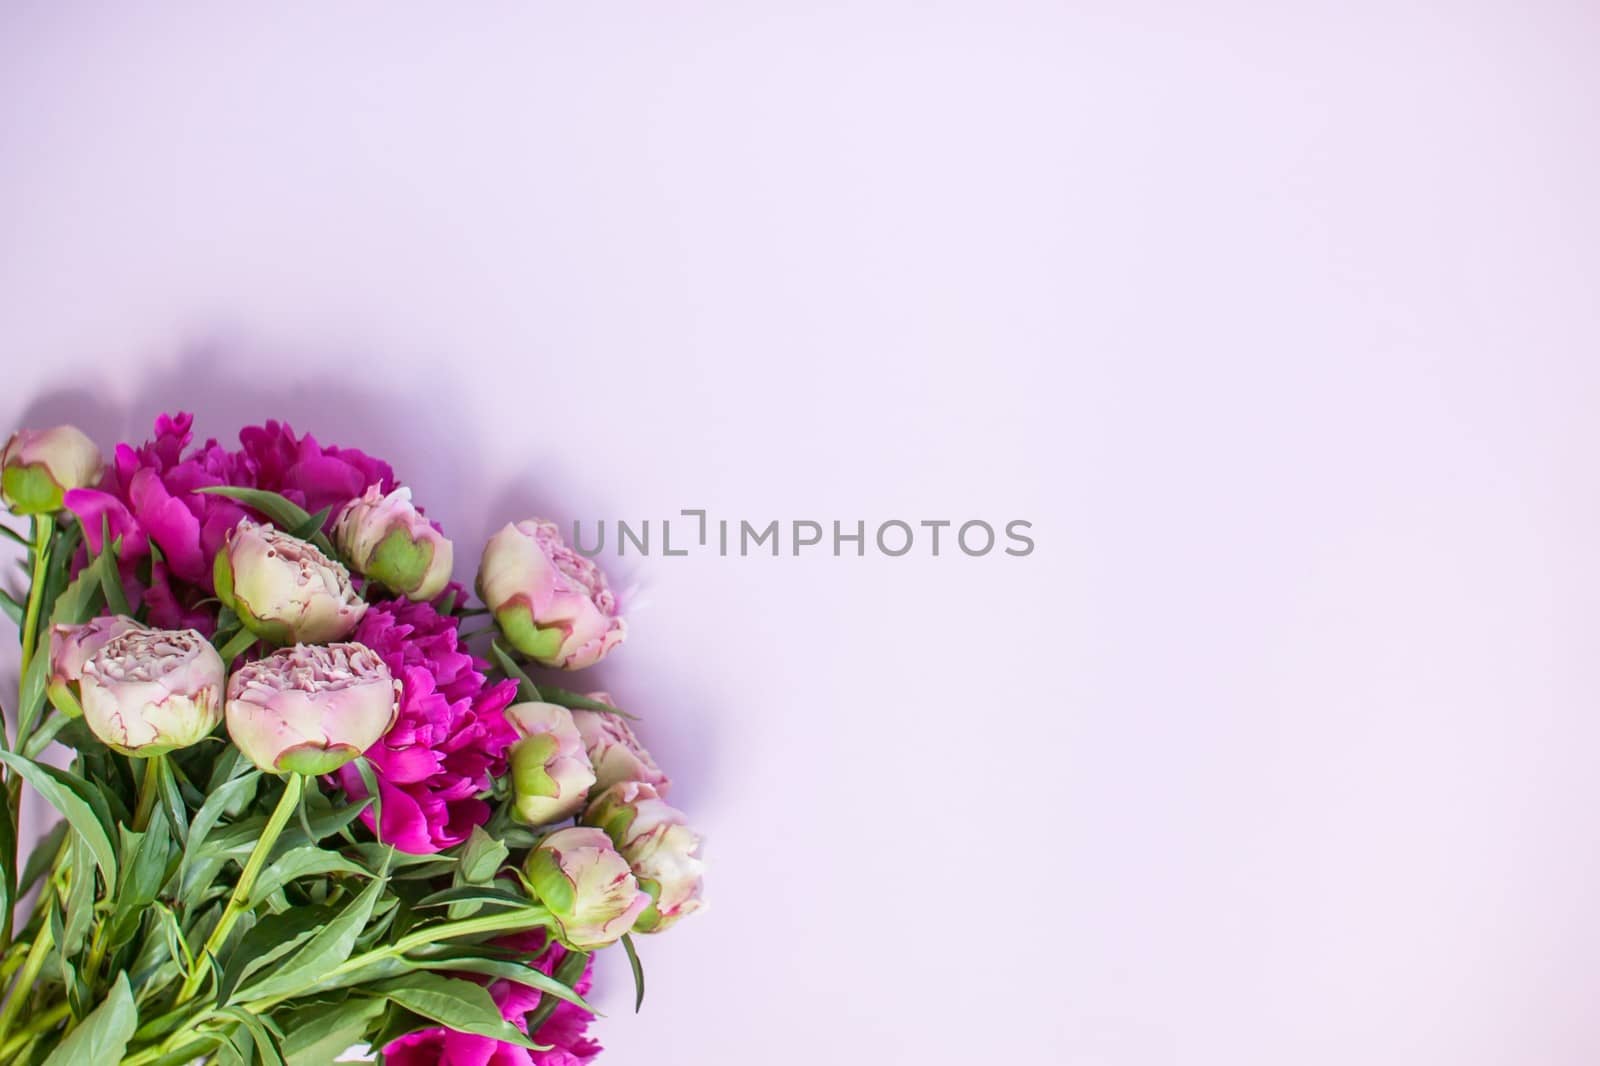 Layout with dark and light pink peonies by malyshkamju